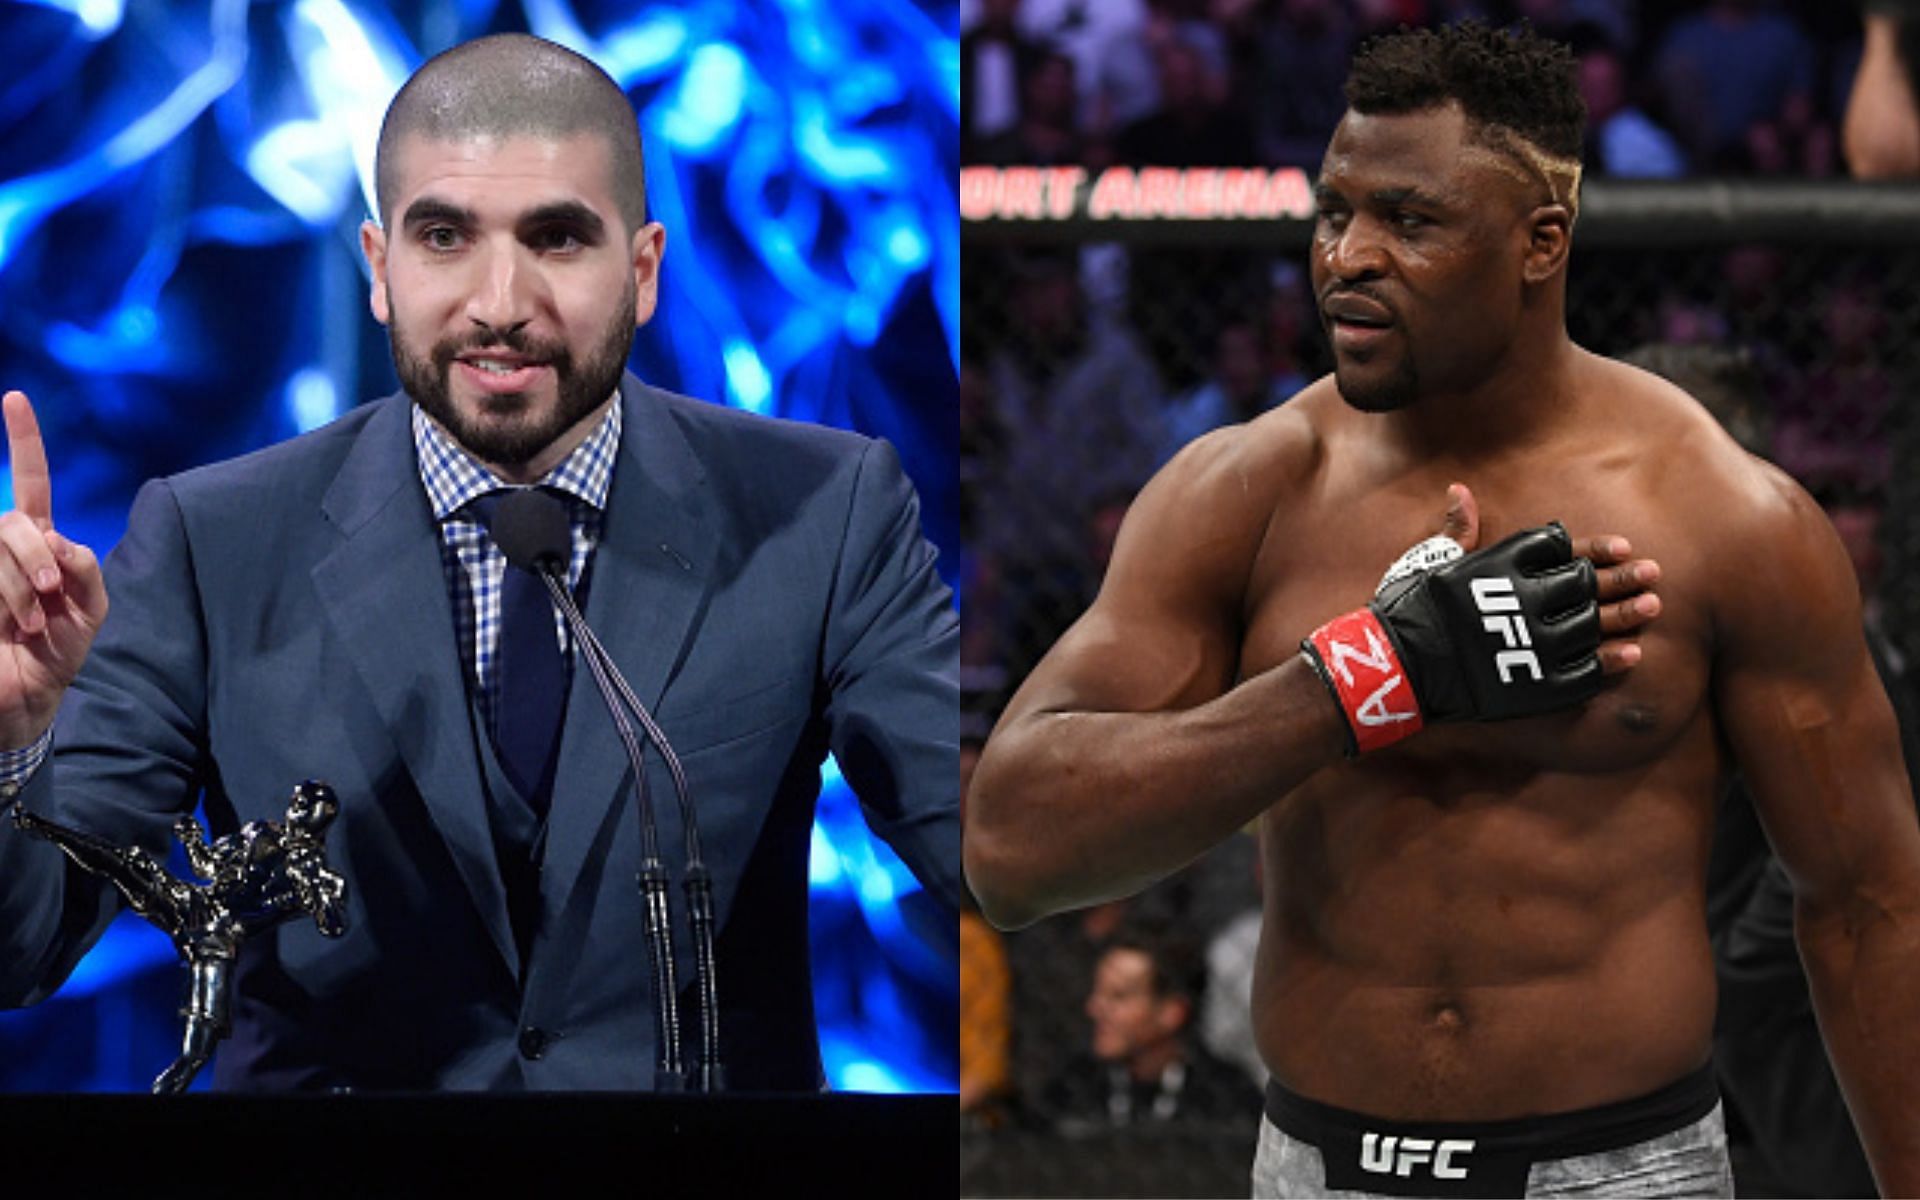 Ariel Helwani (Left) and Francis Ngannou (Right)(Images via Getty)